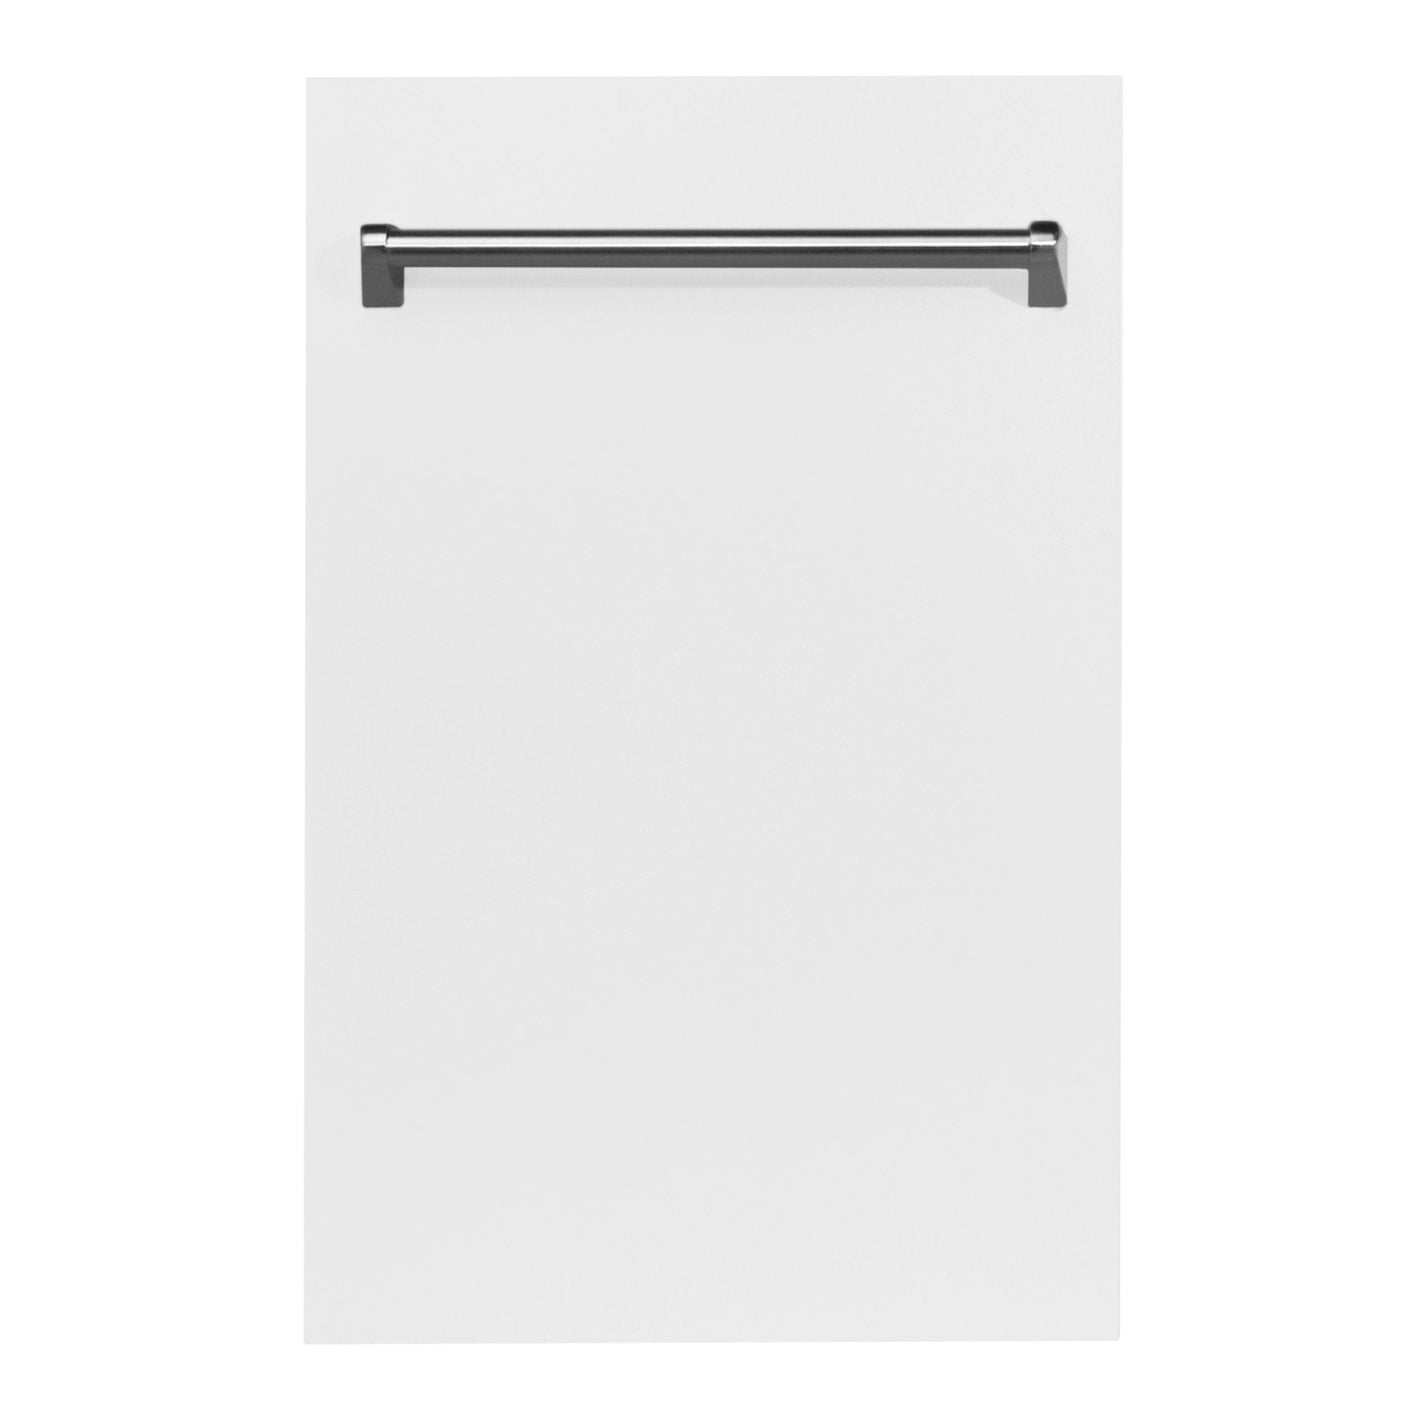 ZLINE 18 in. Dishwasher Panel with Traditional Handle (DP-18) [Color: Black Stainless Steel]